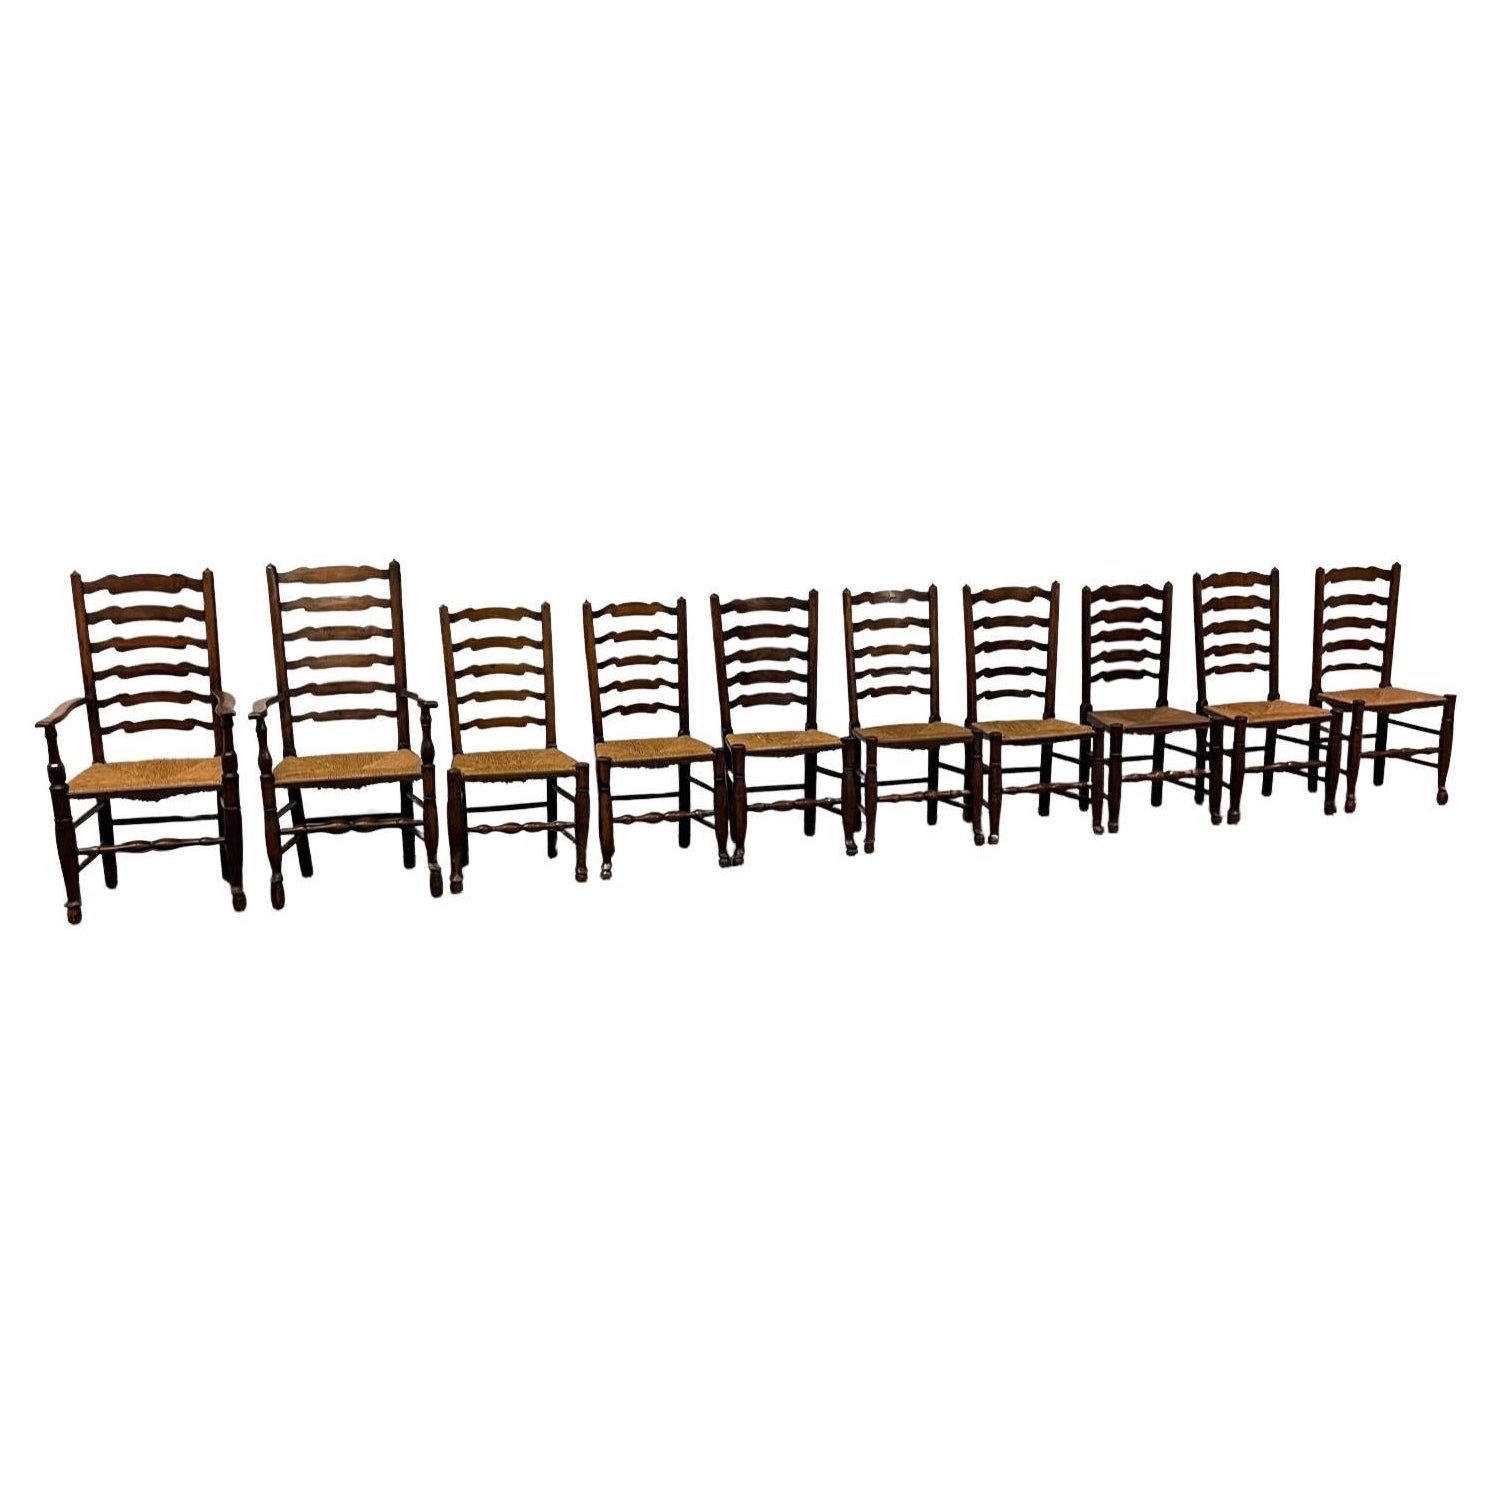 Set of 10 Yorkshire Wavyline Ladderback Chairs For Sale